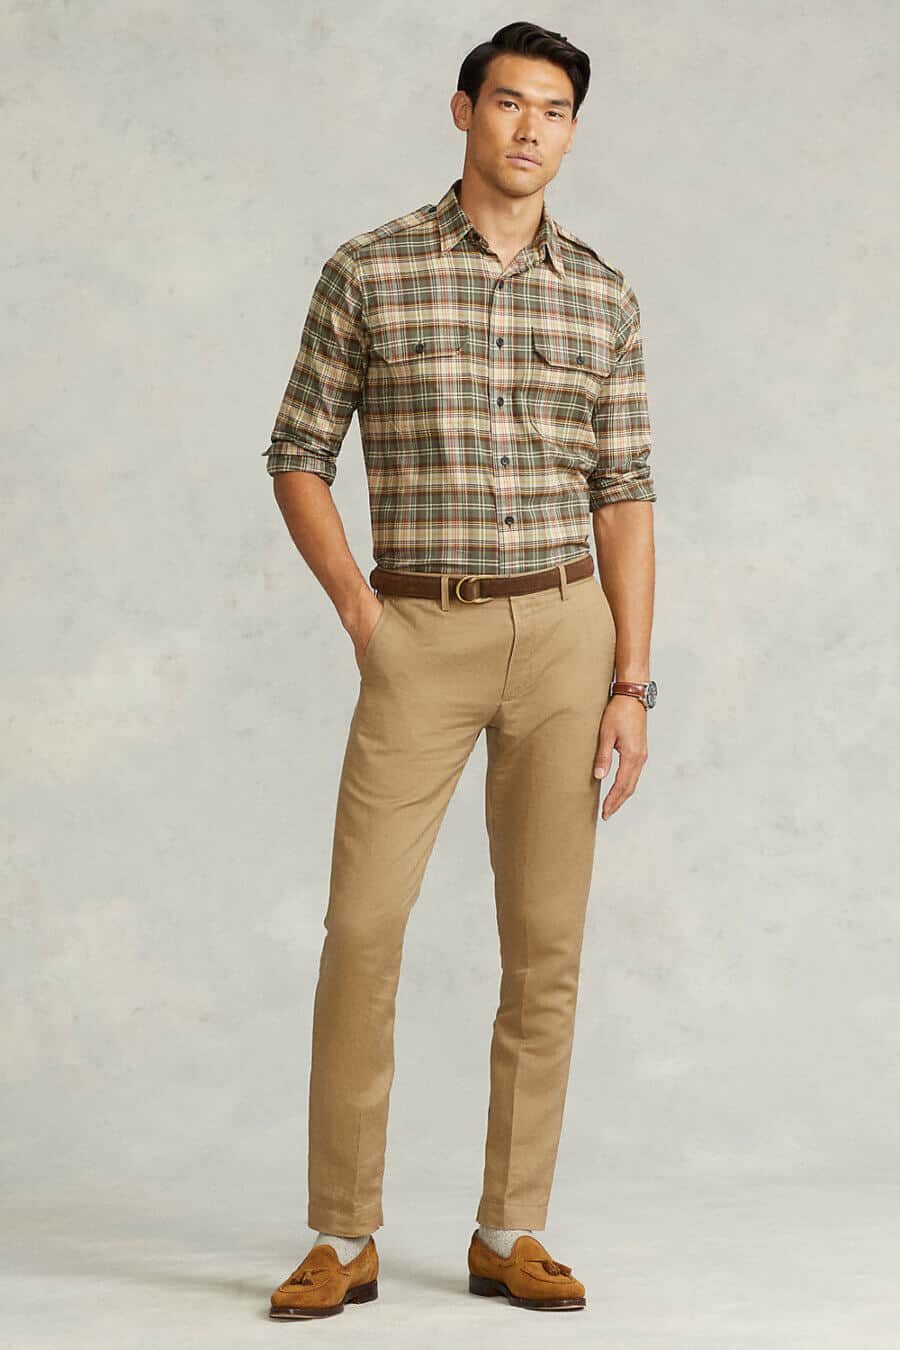 Men's khaki pants worn with a check shirt and suede loafers outfit